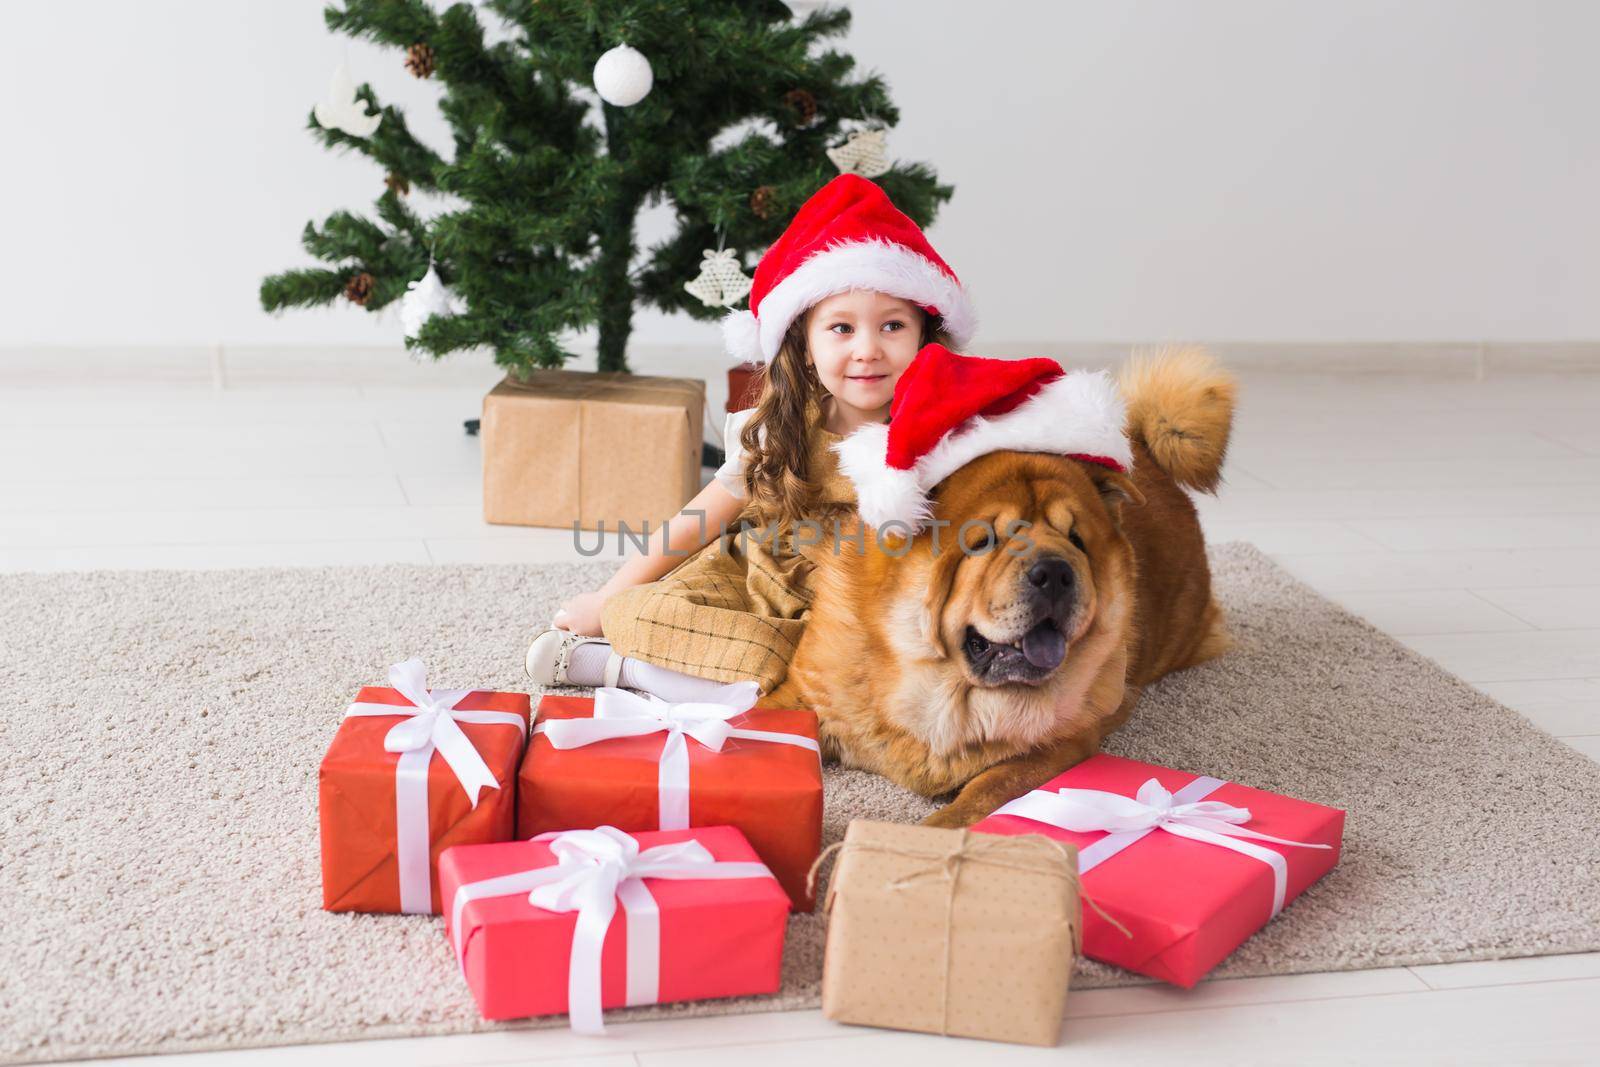 Children and pet concept - Cute girl with chow dog sitting near the Christmas tree. Merry Christmas and Happy Holidays. by Satura86